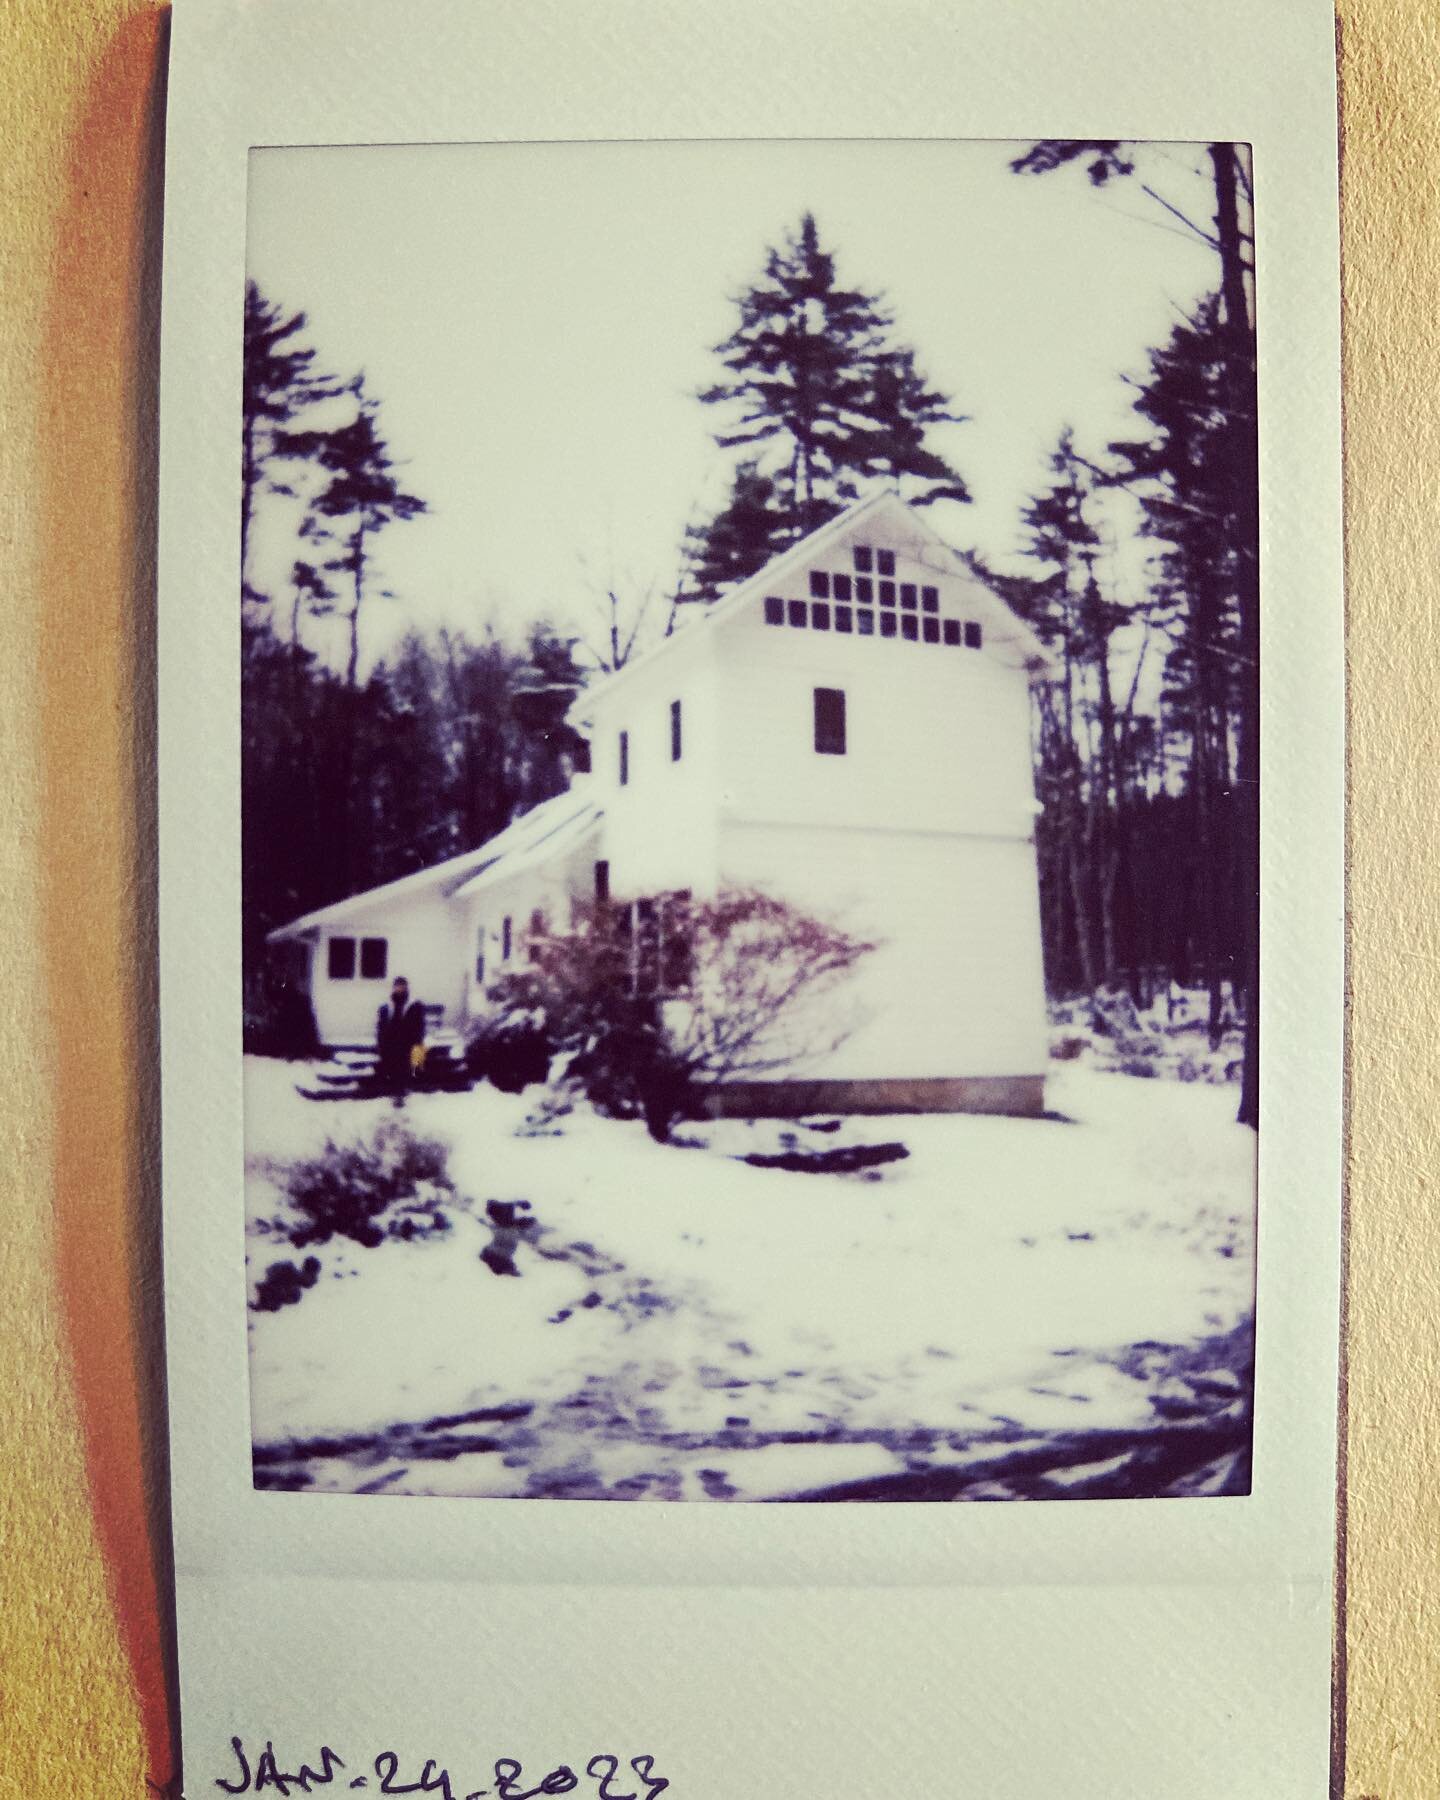 DISTRUCTO RIDES AGAIN. One week. Woodstock. Winter. Recording. Fire. Snow. TPunkt. O. Piano. Mia. West Kill. Beer. Greyhounds. Synthesizers. Cassette tape. Acoustic guitar. Instax camera. An EP to come? 💽🎛️☎️🌲✨ #distructo #distructoberlin #piano #